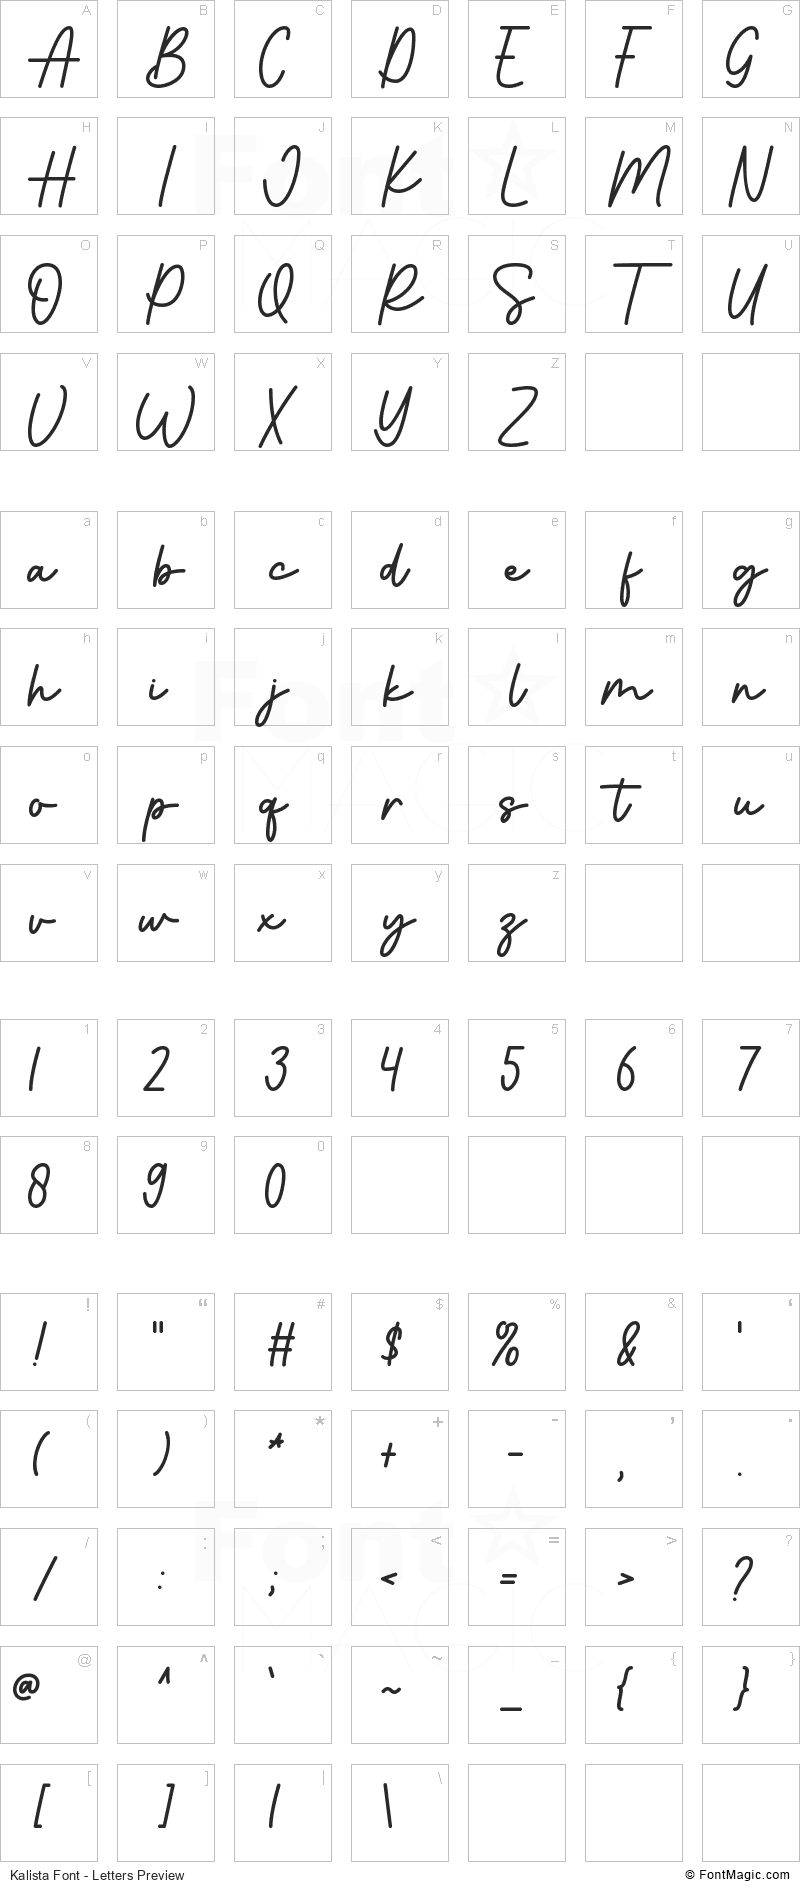 Kalista Font - All Latters Preview Chart